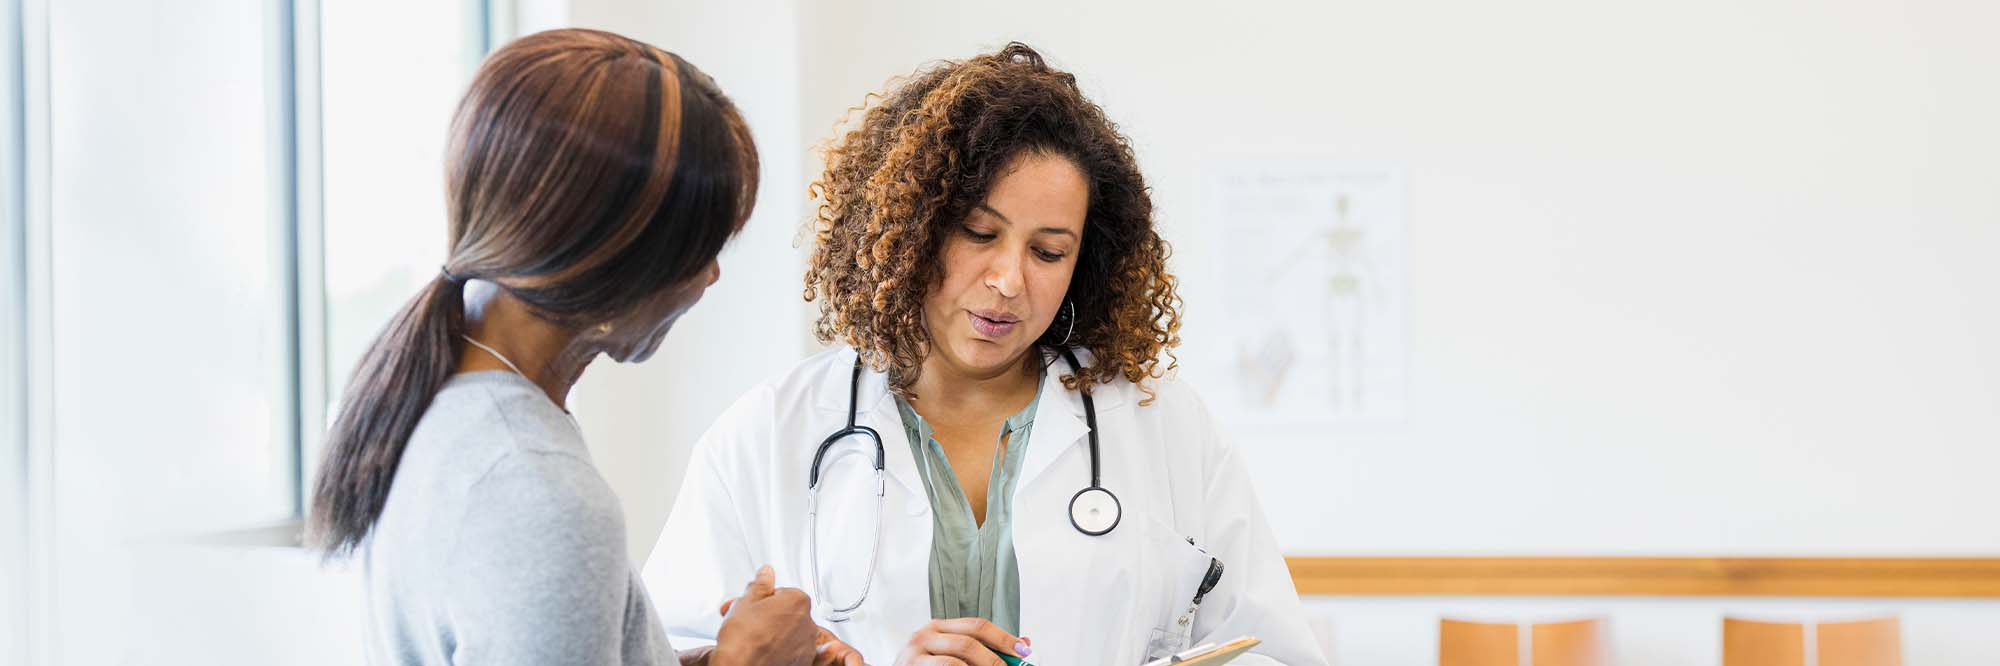 Uterine fibroid treatment options: What you need to know